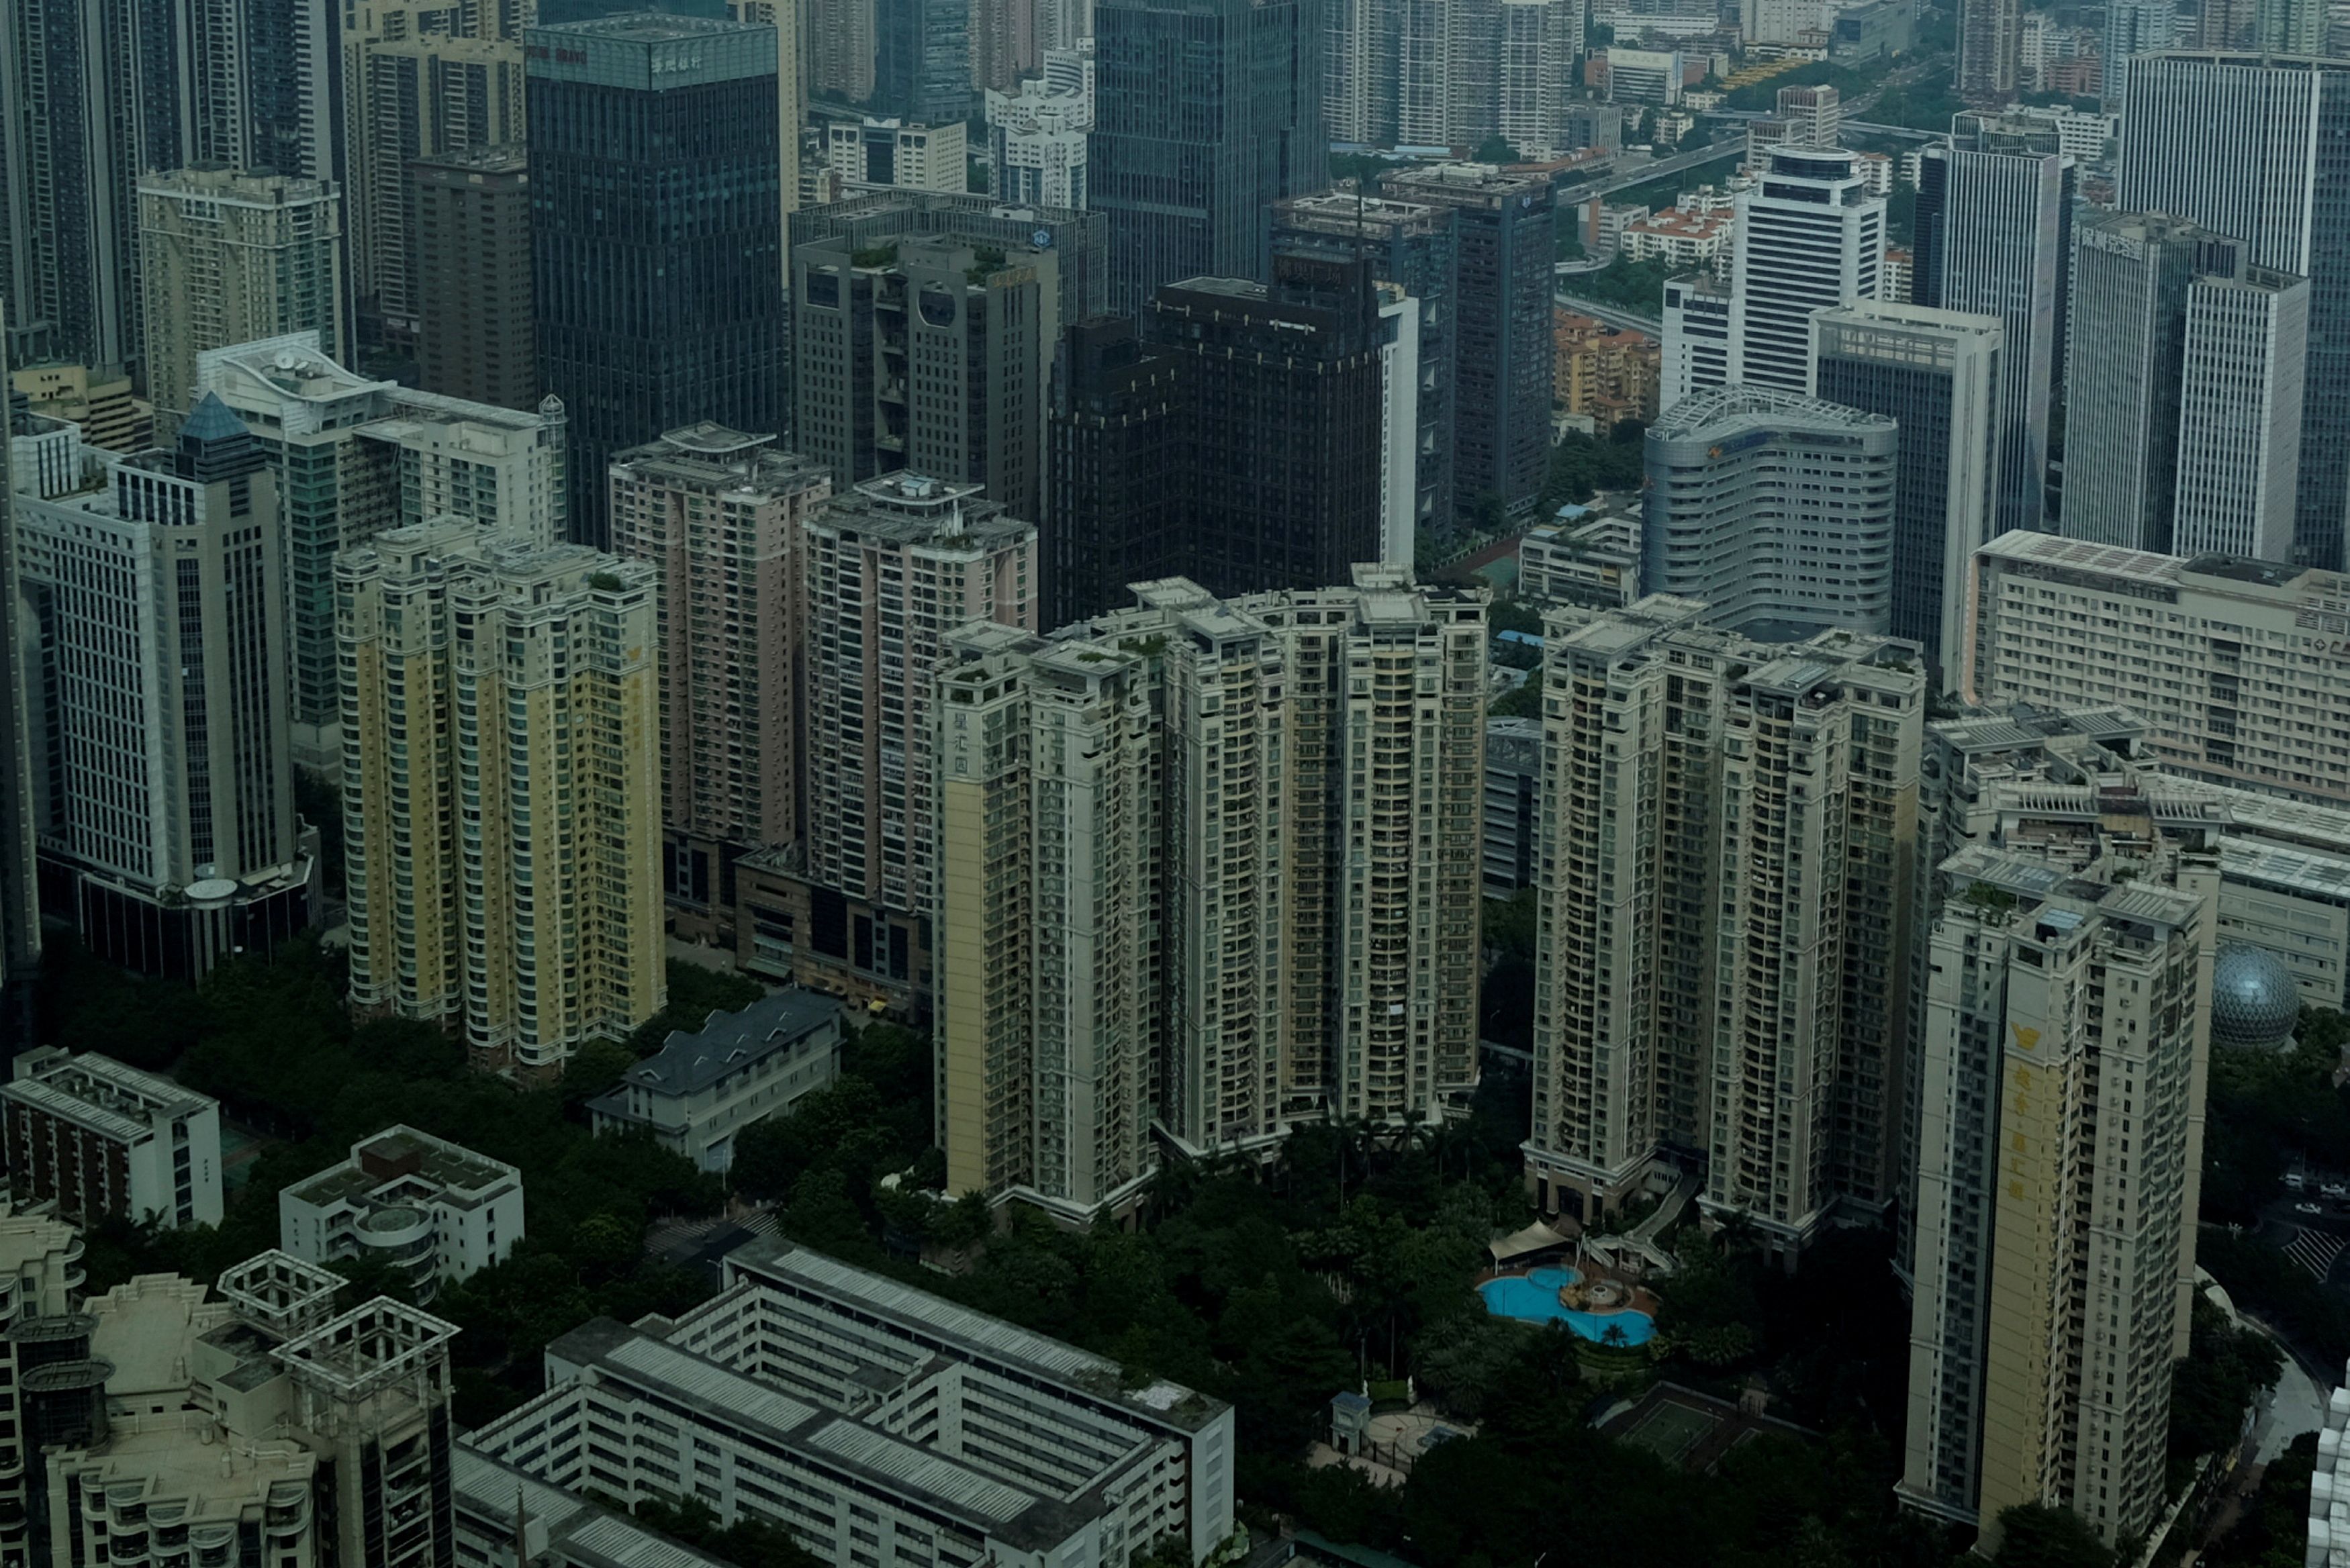 Residential and commercial buildings are located in downtown Guangzhou